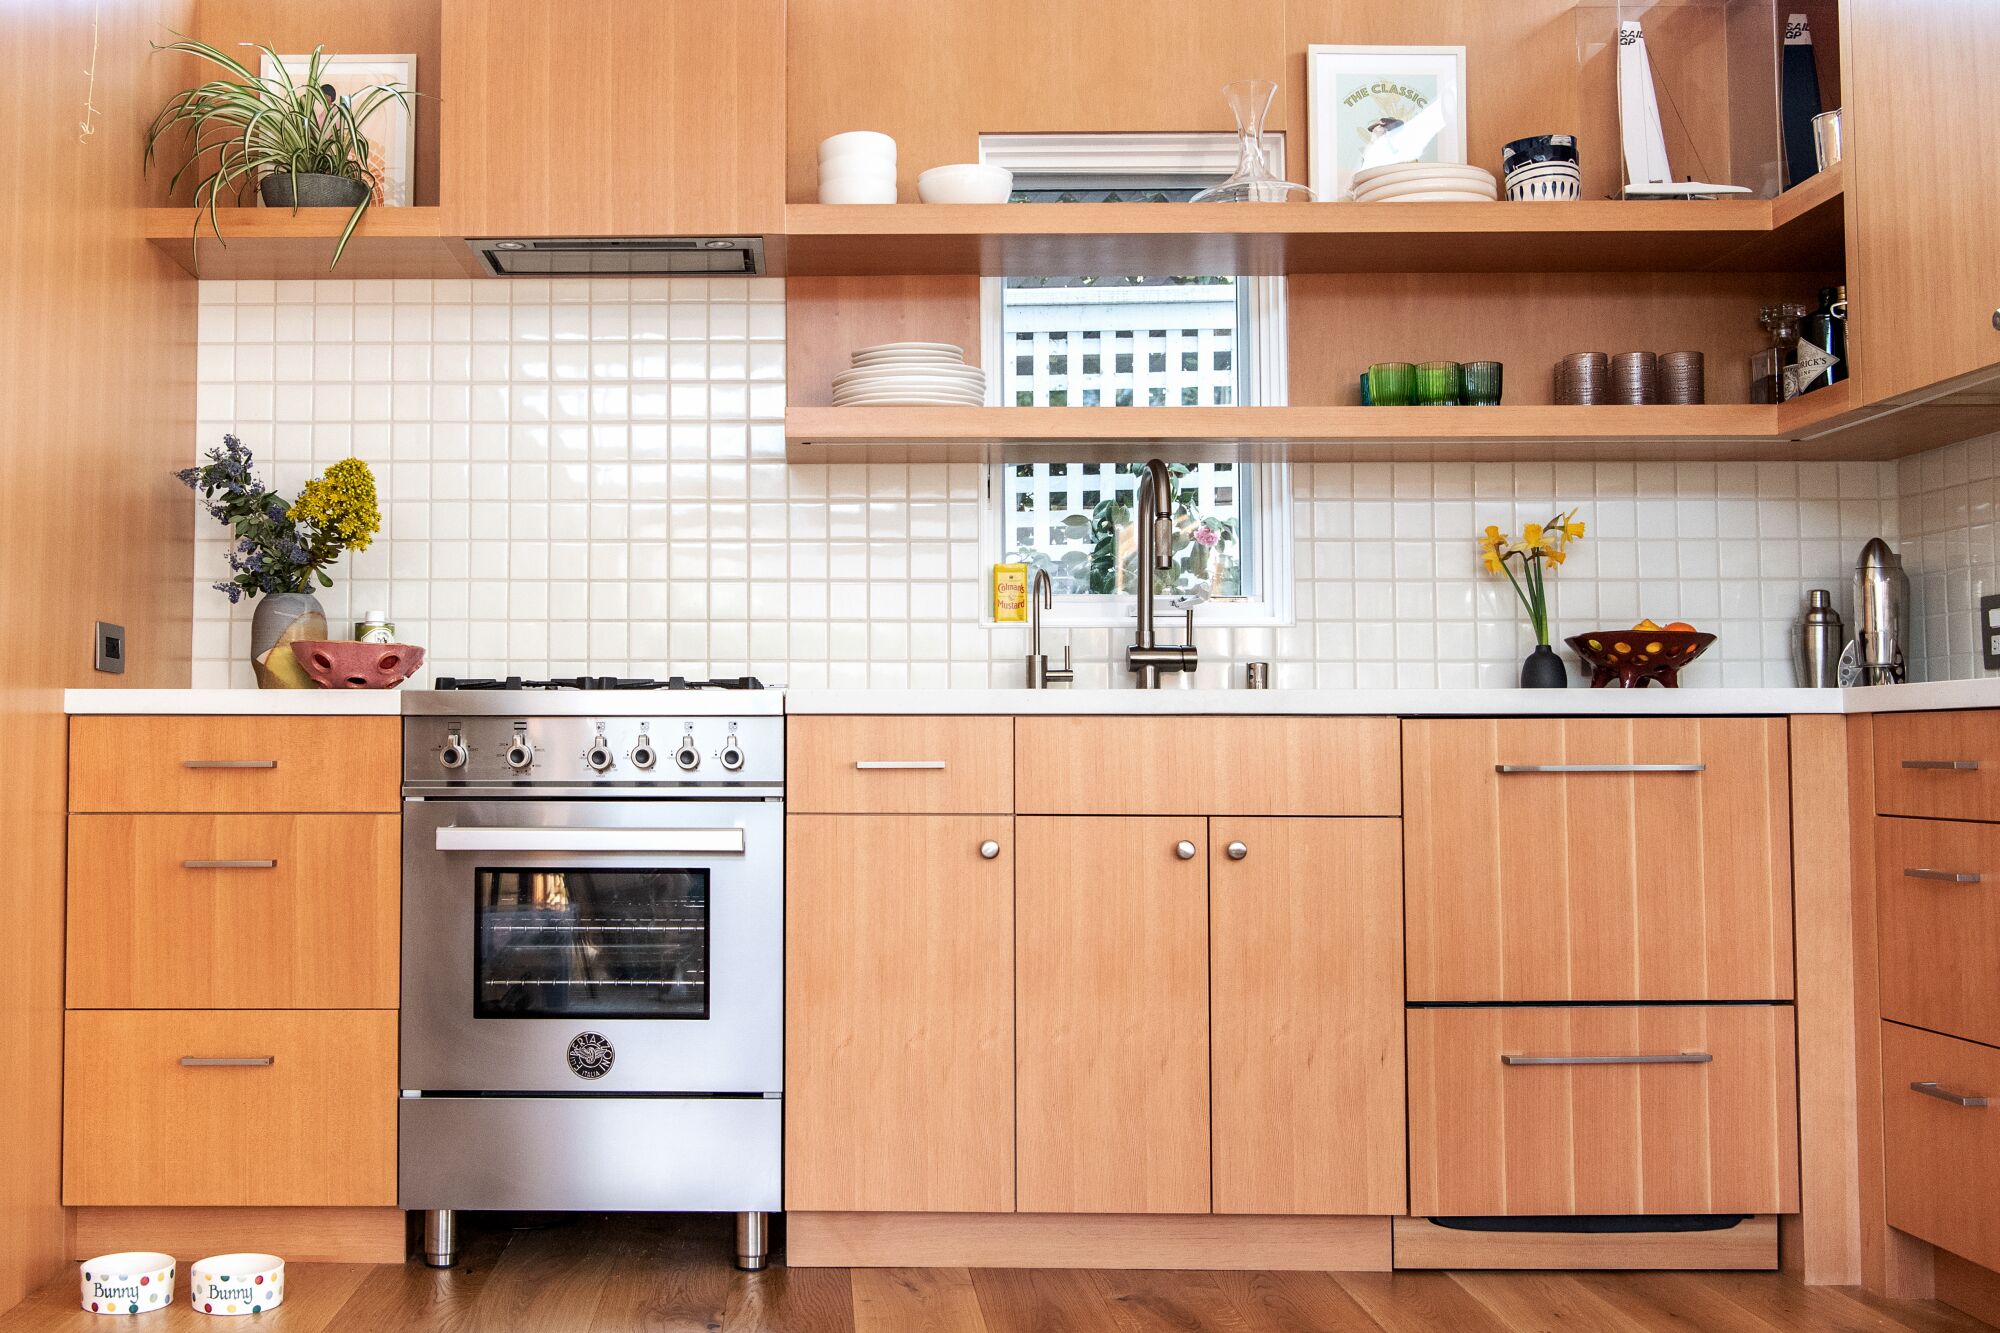 A small kitchen with natural wood cabinets and white tiles.